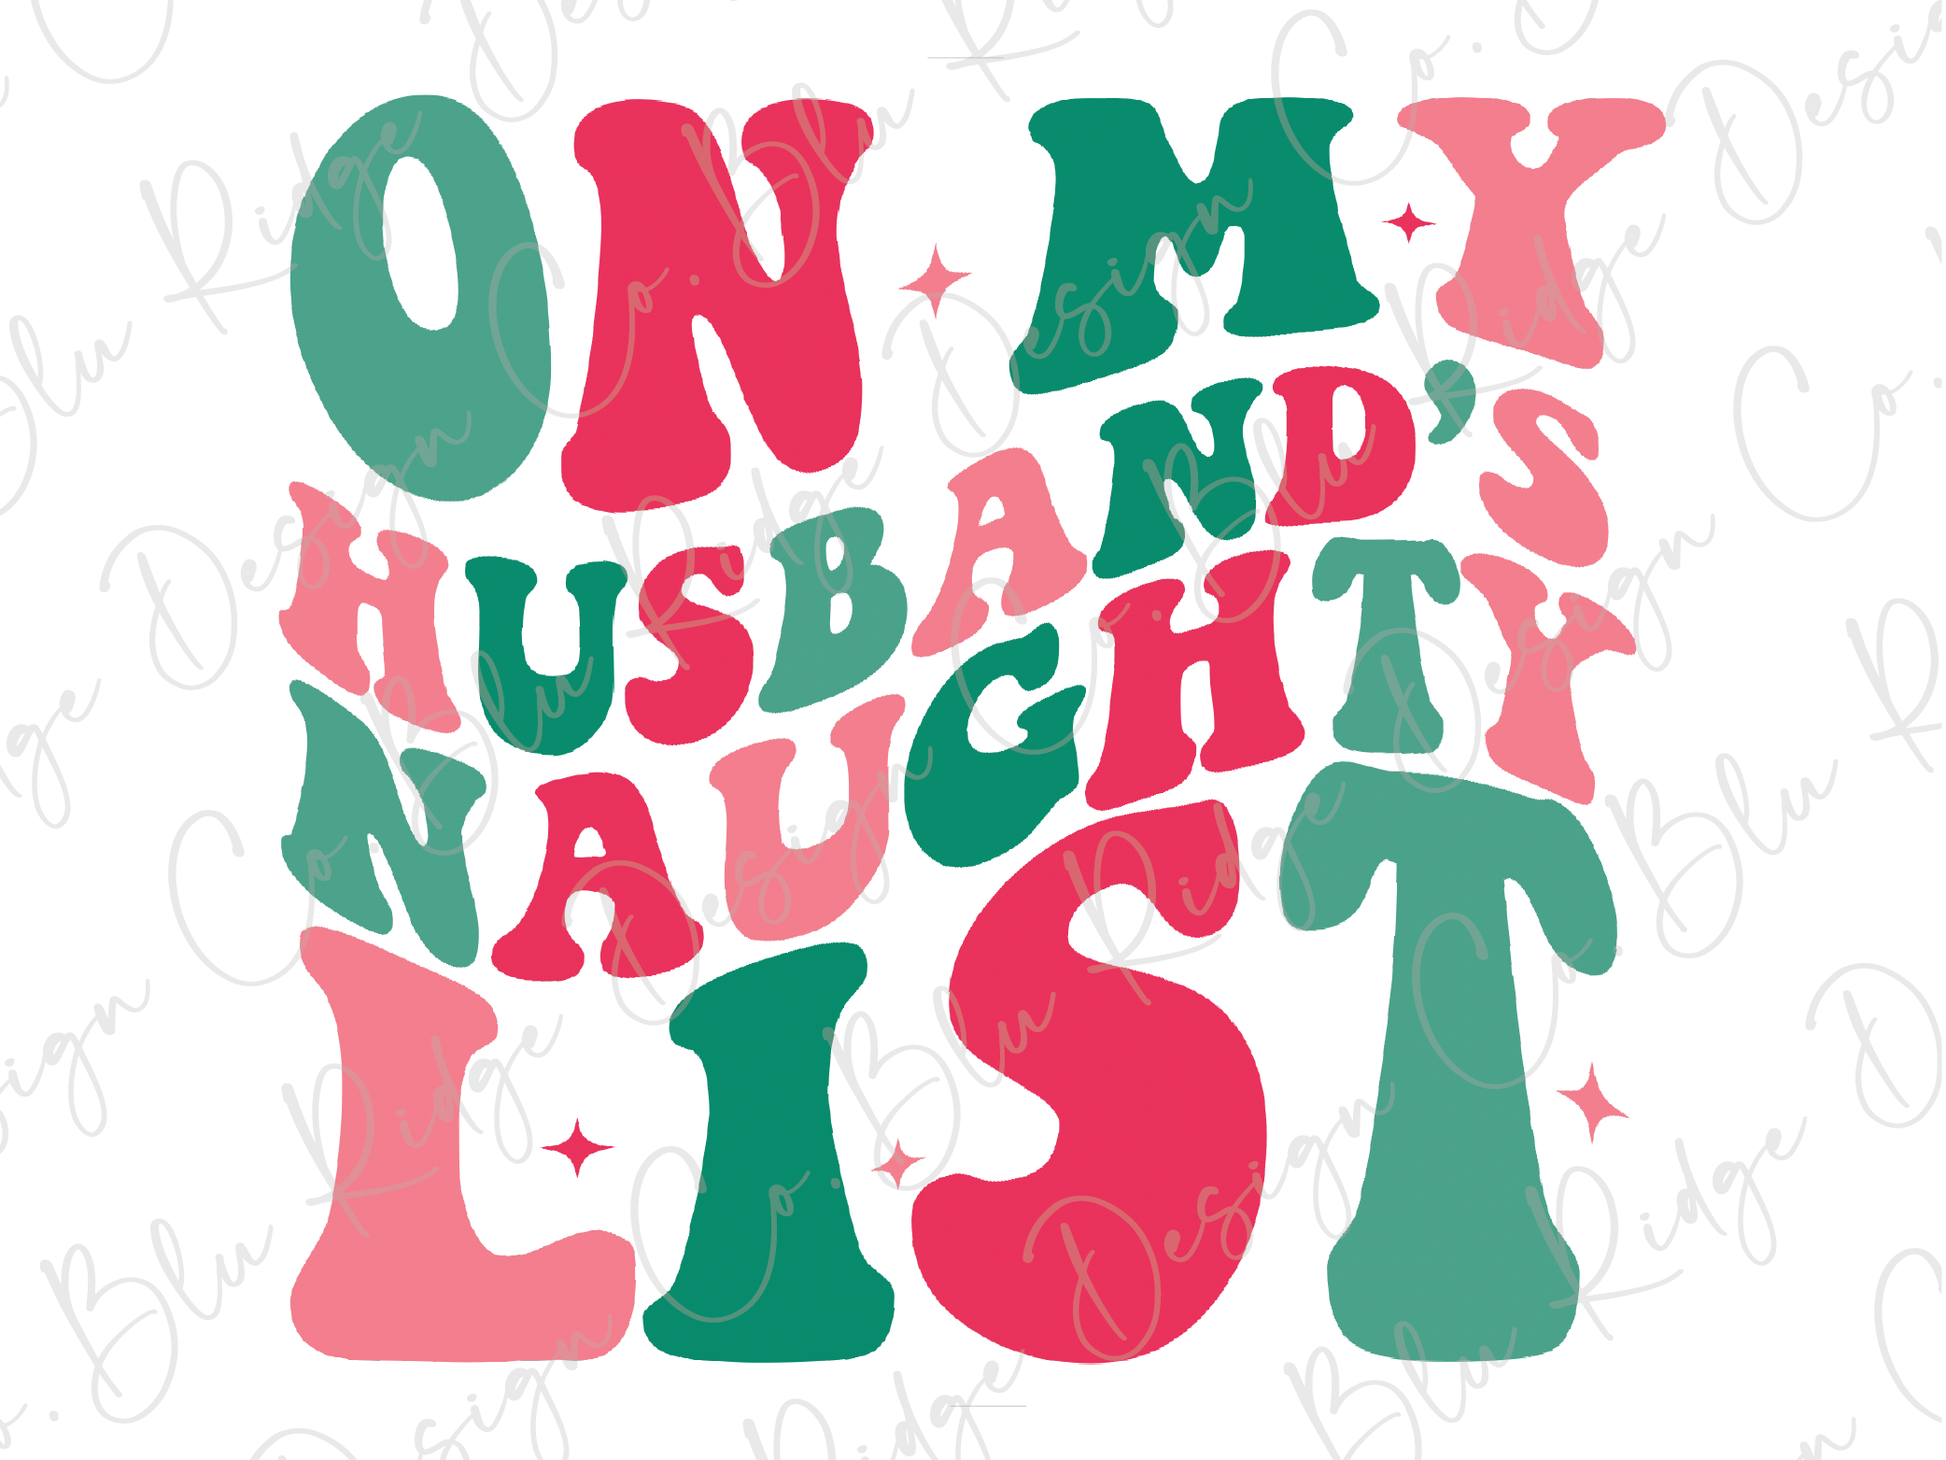 the words on my husband's naught list